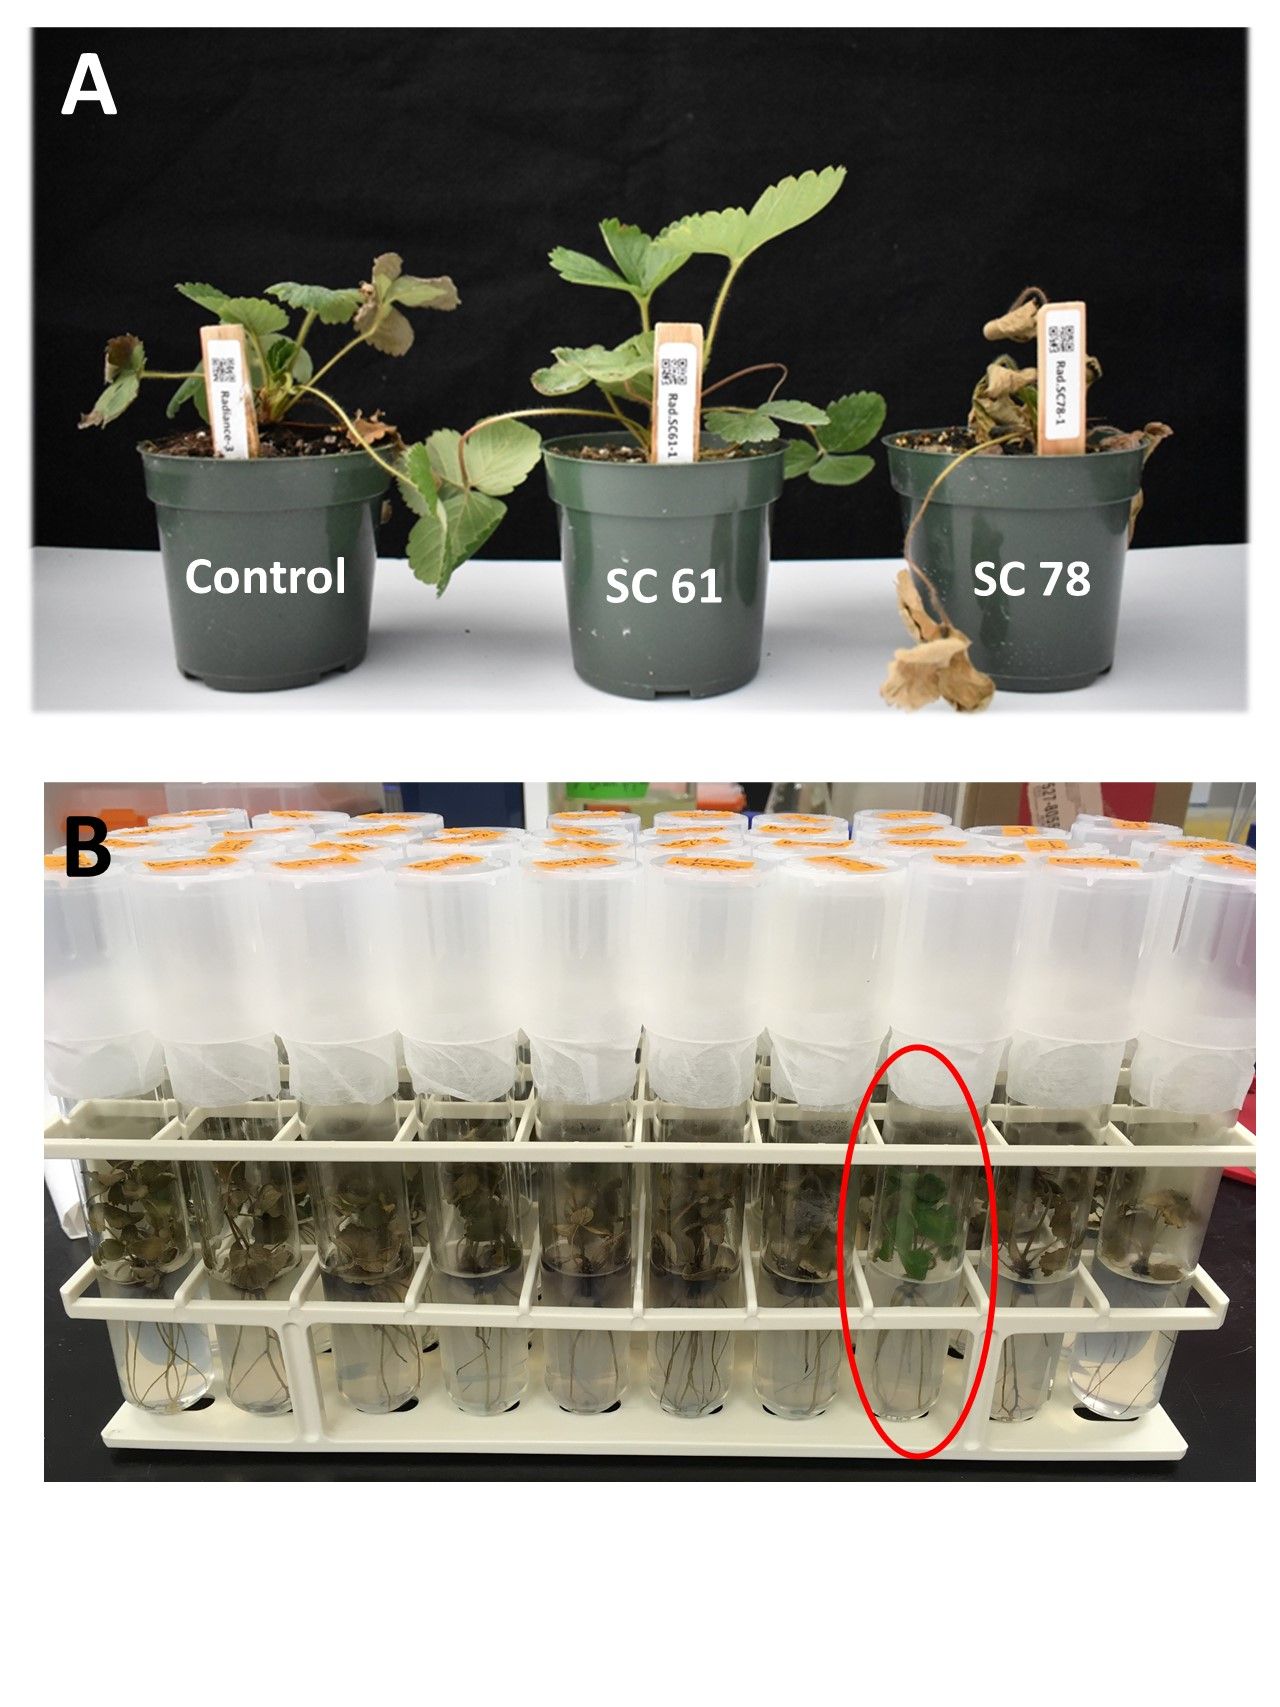 Screening UF strawberry somaclones for heat tolerance. (A) The seedlings were tested in the greenhouse. Original ‘Florida Radiance’ plants were used as a control. A somaclone in the middle of the image showed tolerance to the heat stress. (B) ‘Florida Beauty’ somaclones in test tubes were tested in a growth chamber. About 10% of SCs were heat tolerant after a week of incubation, as indicated by the red circle. 